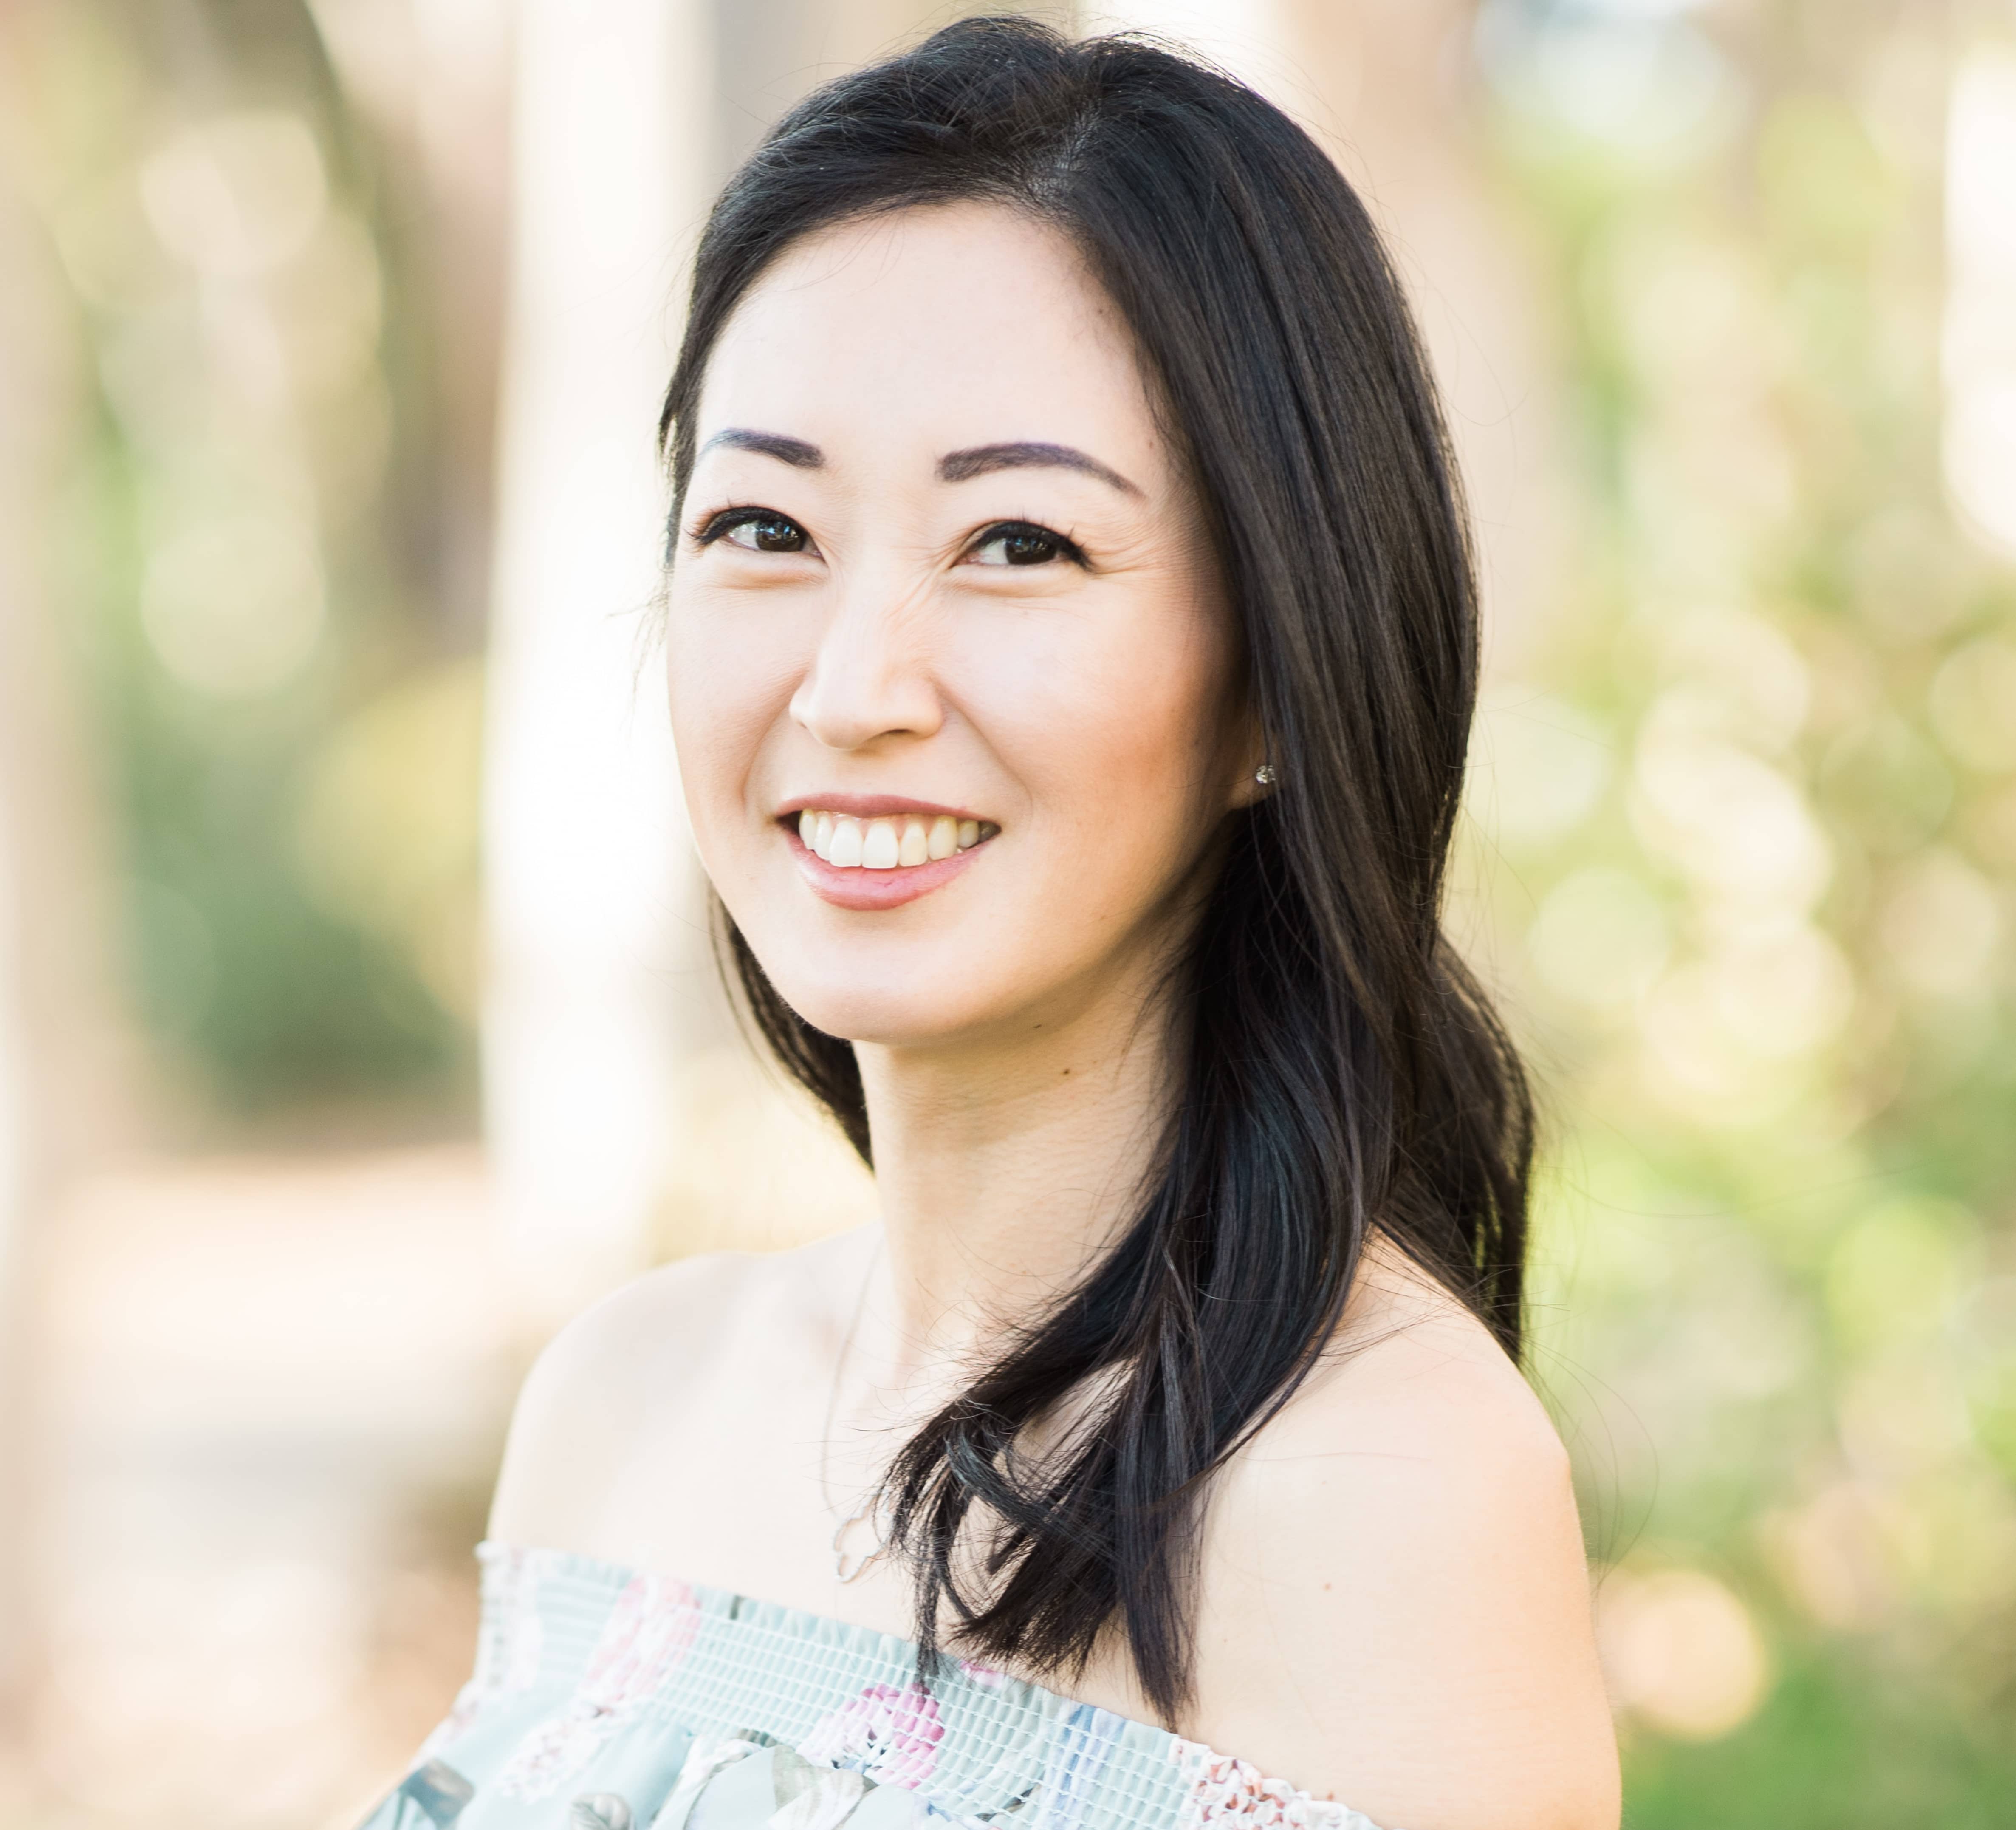 Rheaply Hires Connie Kim as Chief Operating Officer